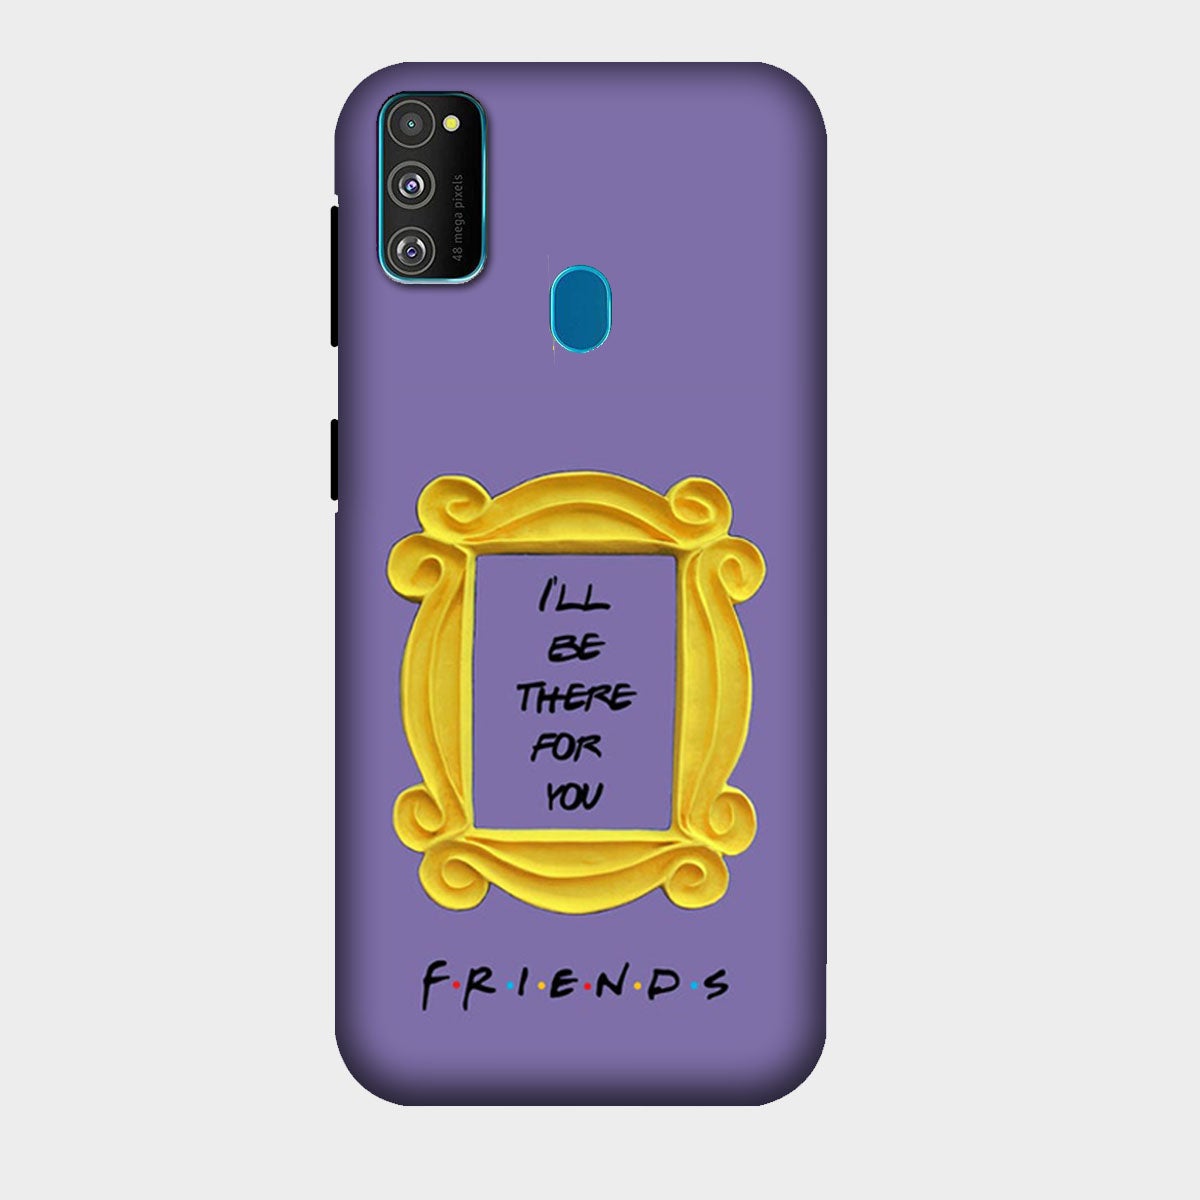 Friends - Frame - I'll be There for You - Mobile Phone Cover - Hard Case - Samsung - Samsung